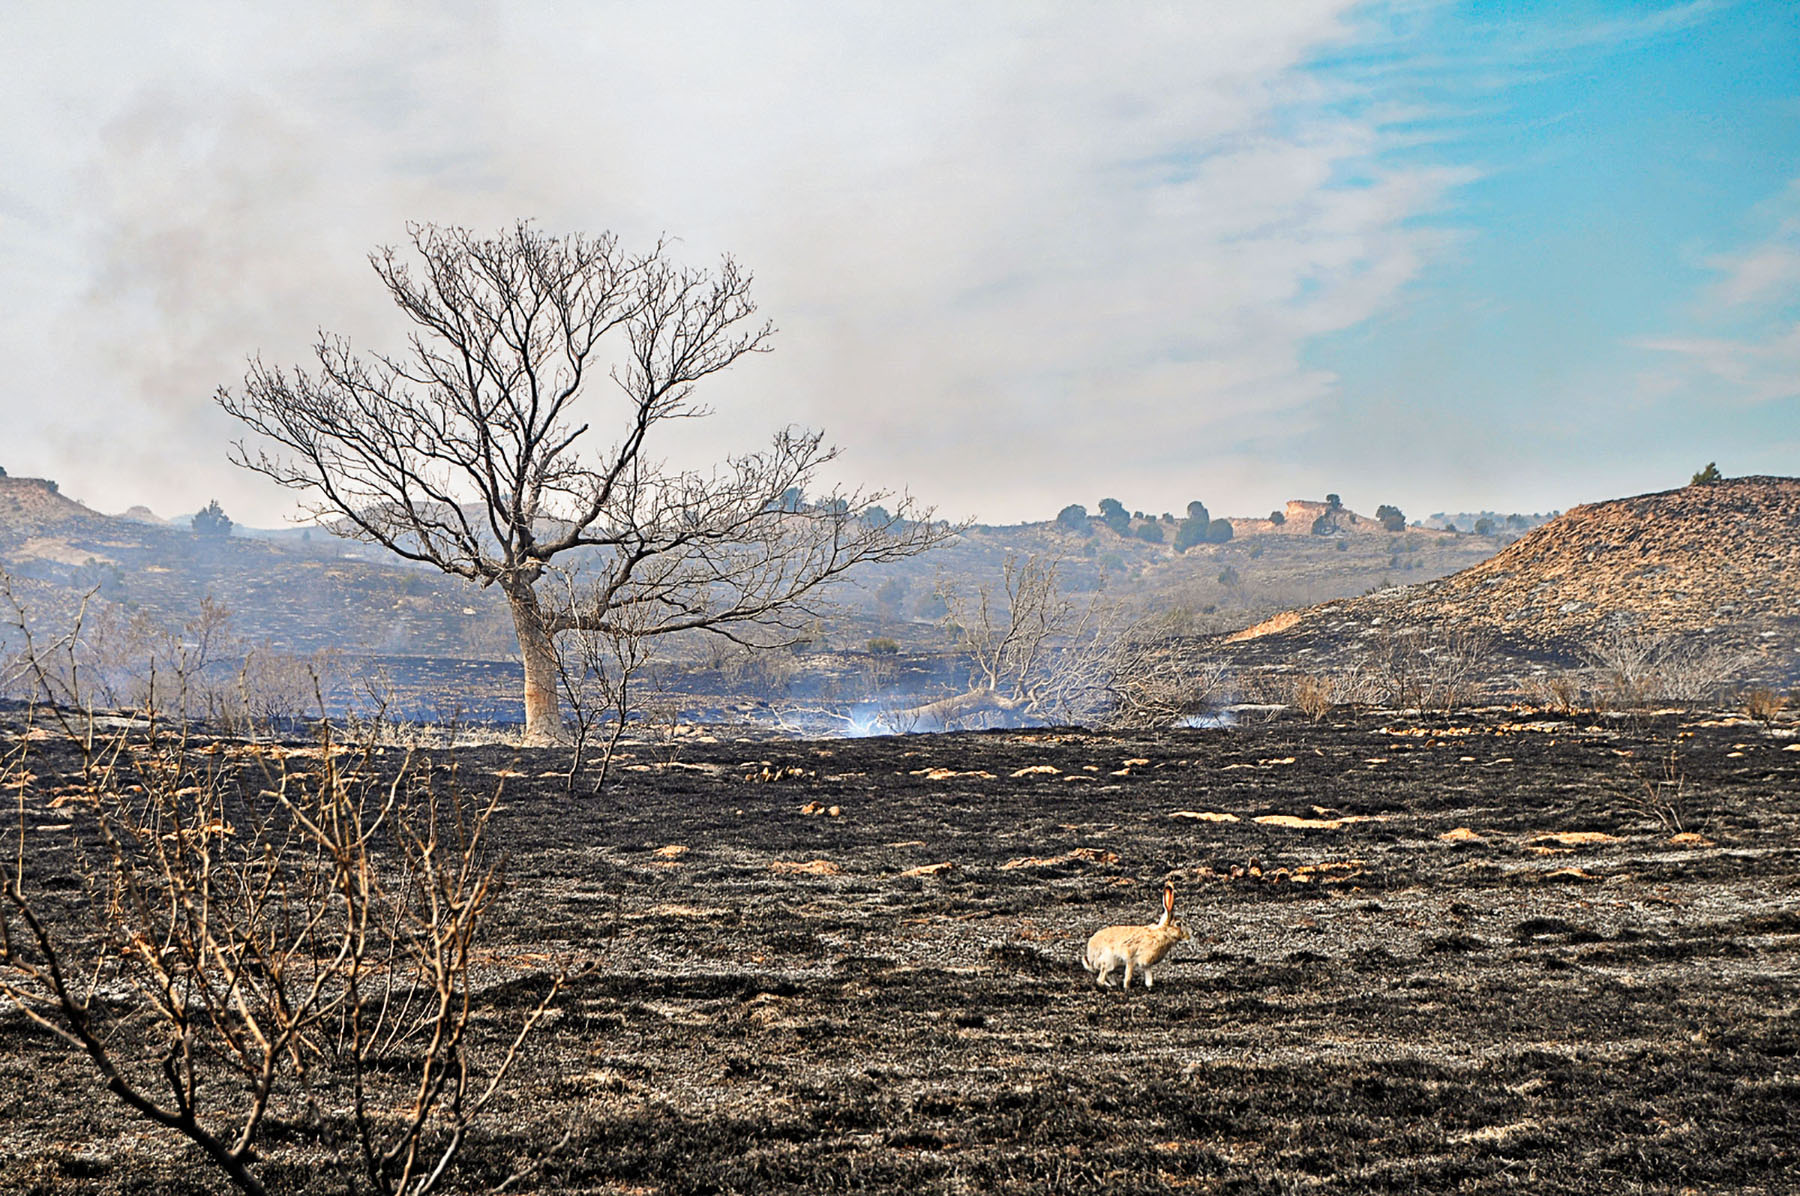 A small jackrabbit looks around a scorched scene next to a burned tree, with a small plume of smoke in the background